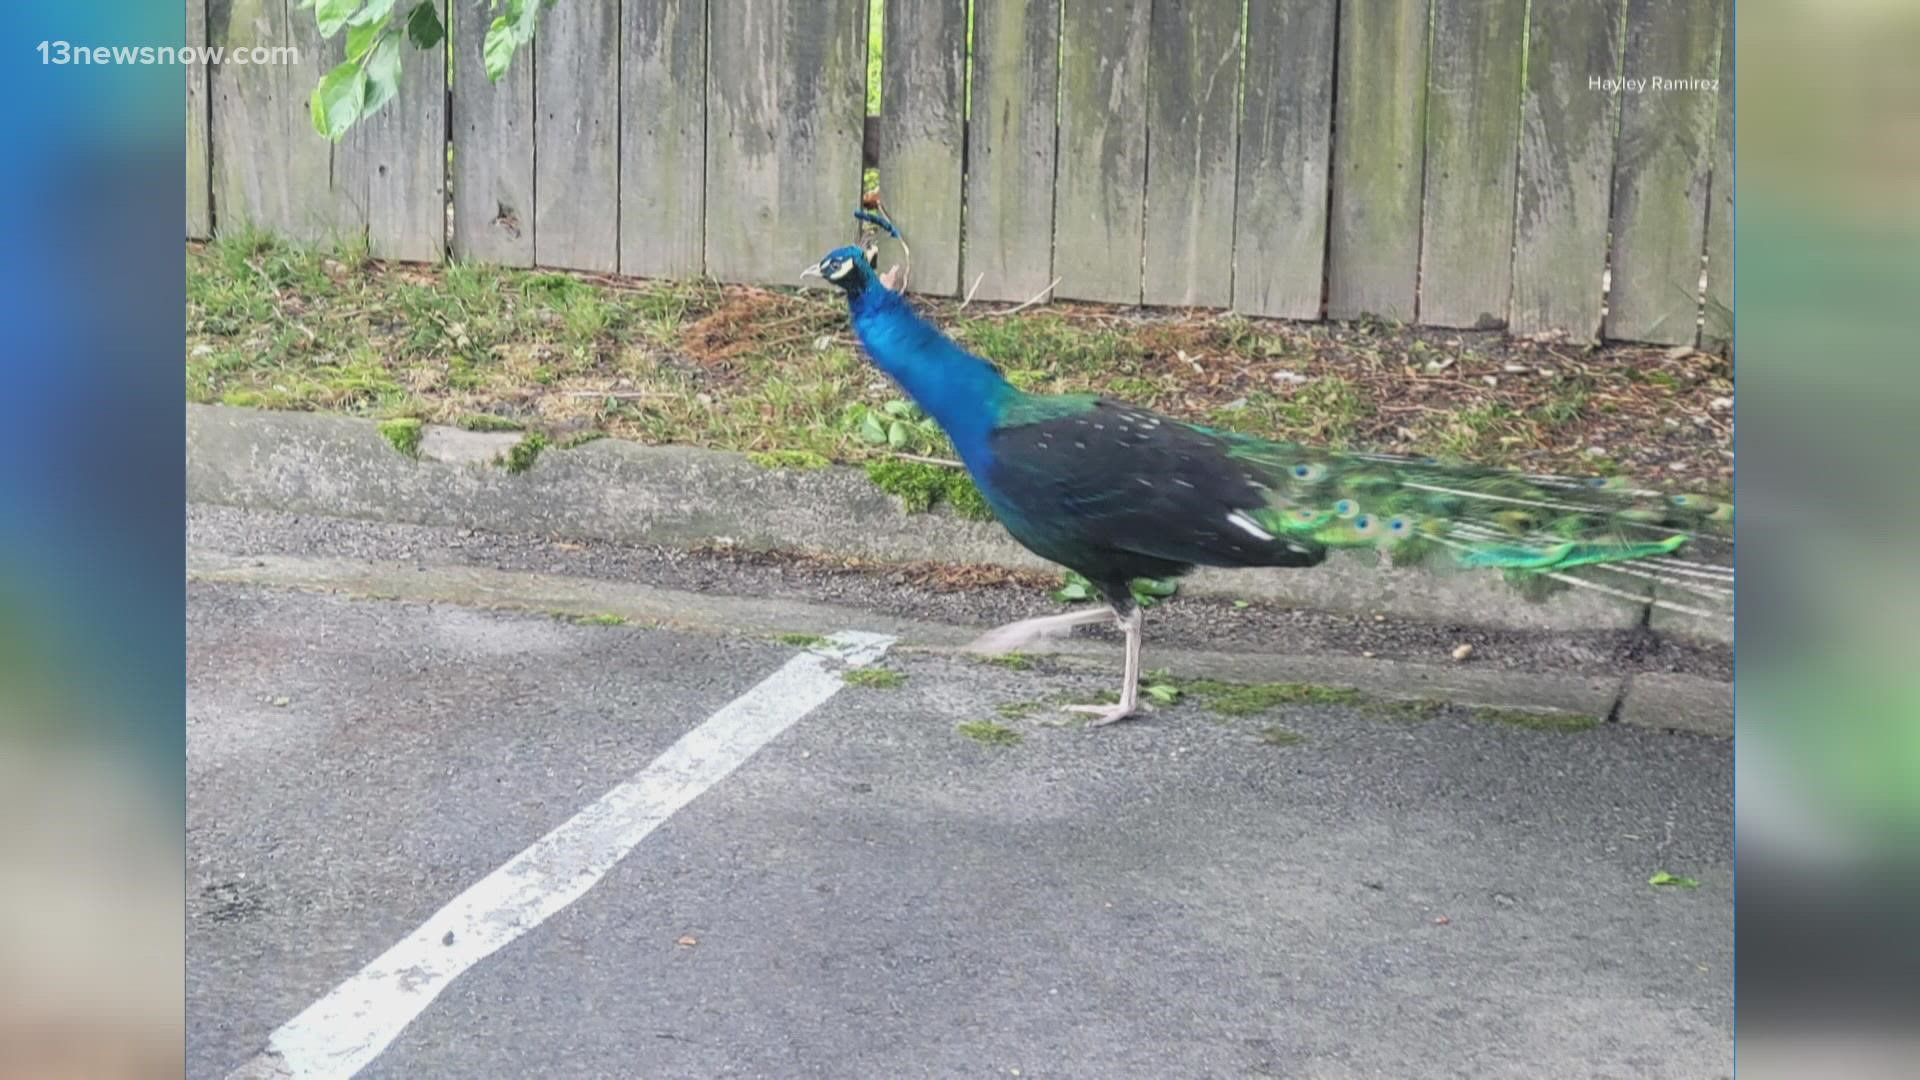 A peacock is running loose in the City of Chesapeake. People spotted the exotic bird last week, and animal control has so far been unable to catch it.